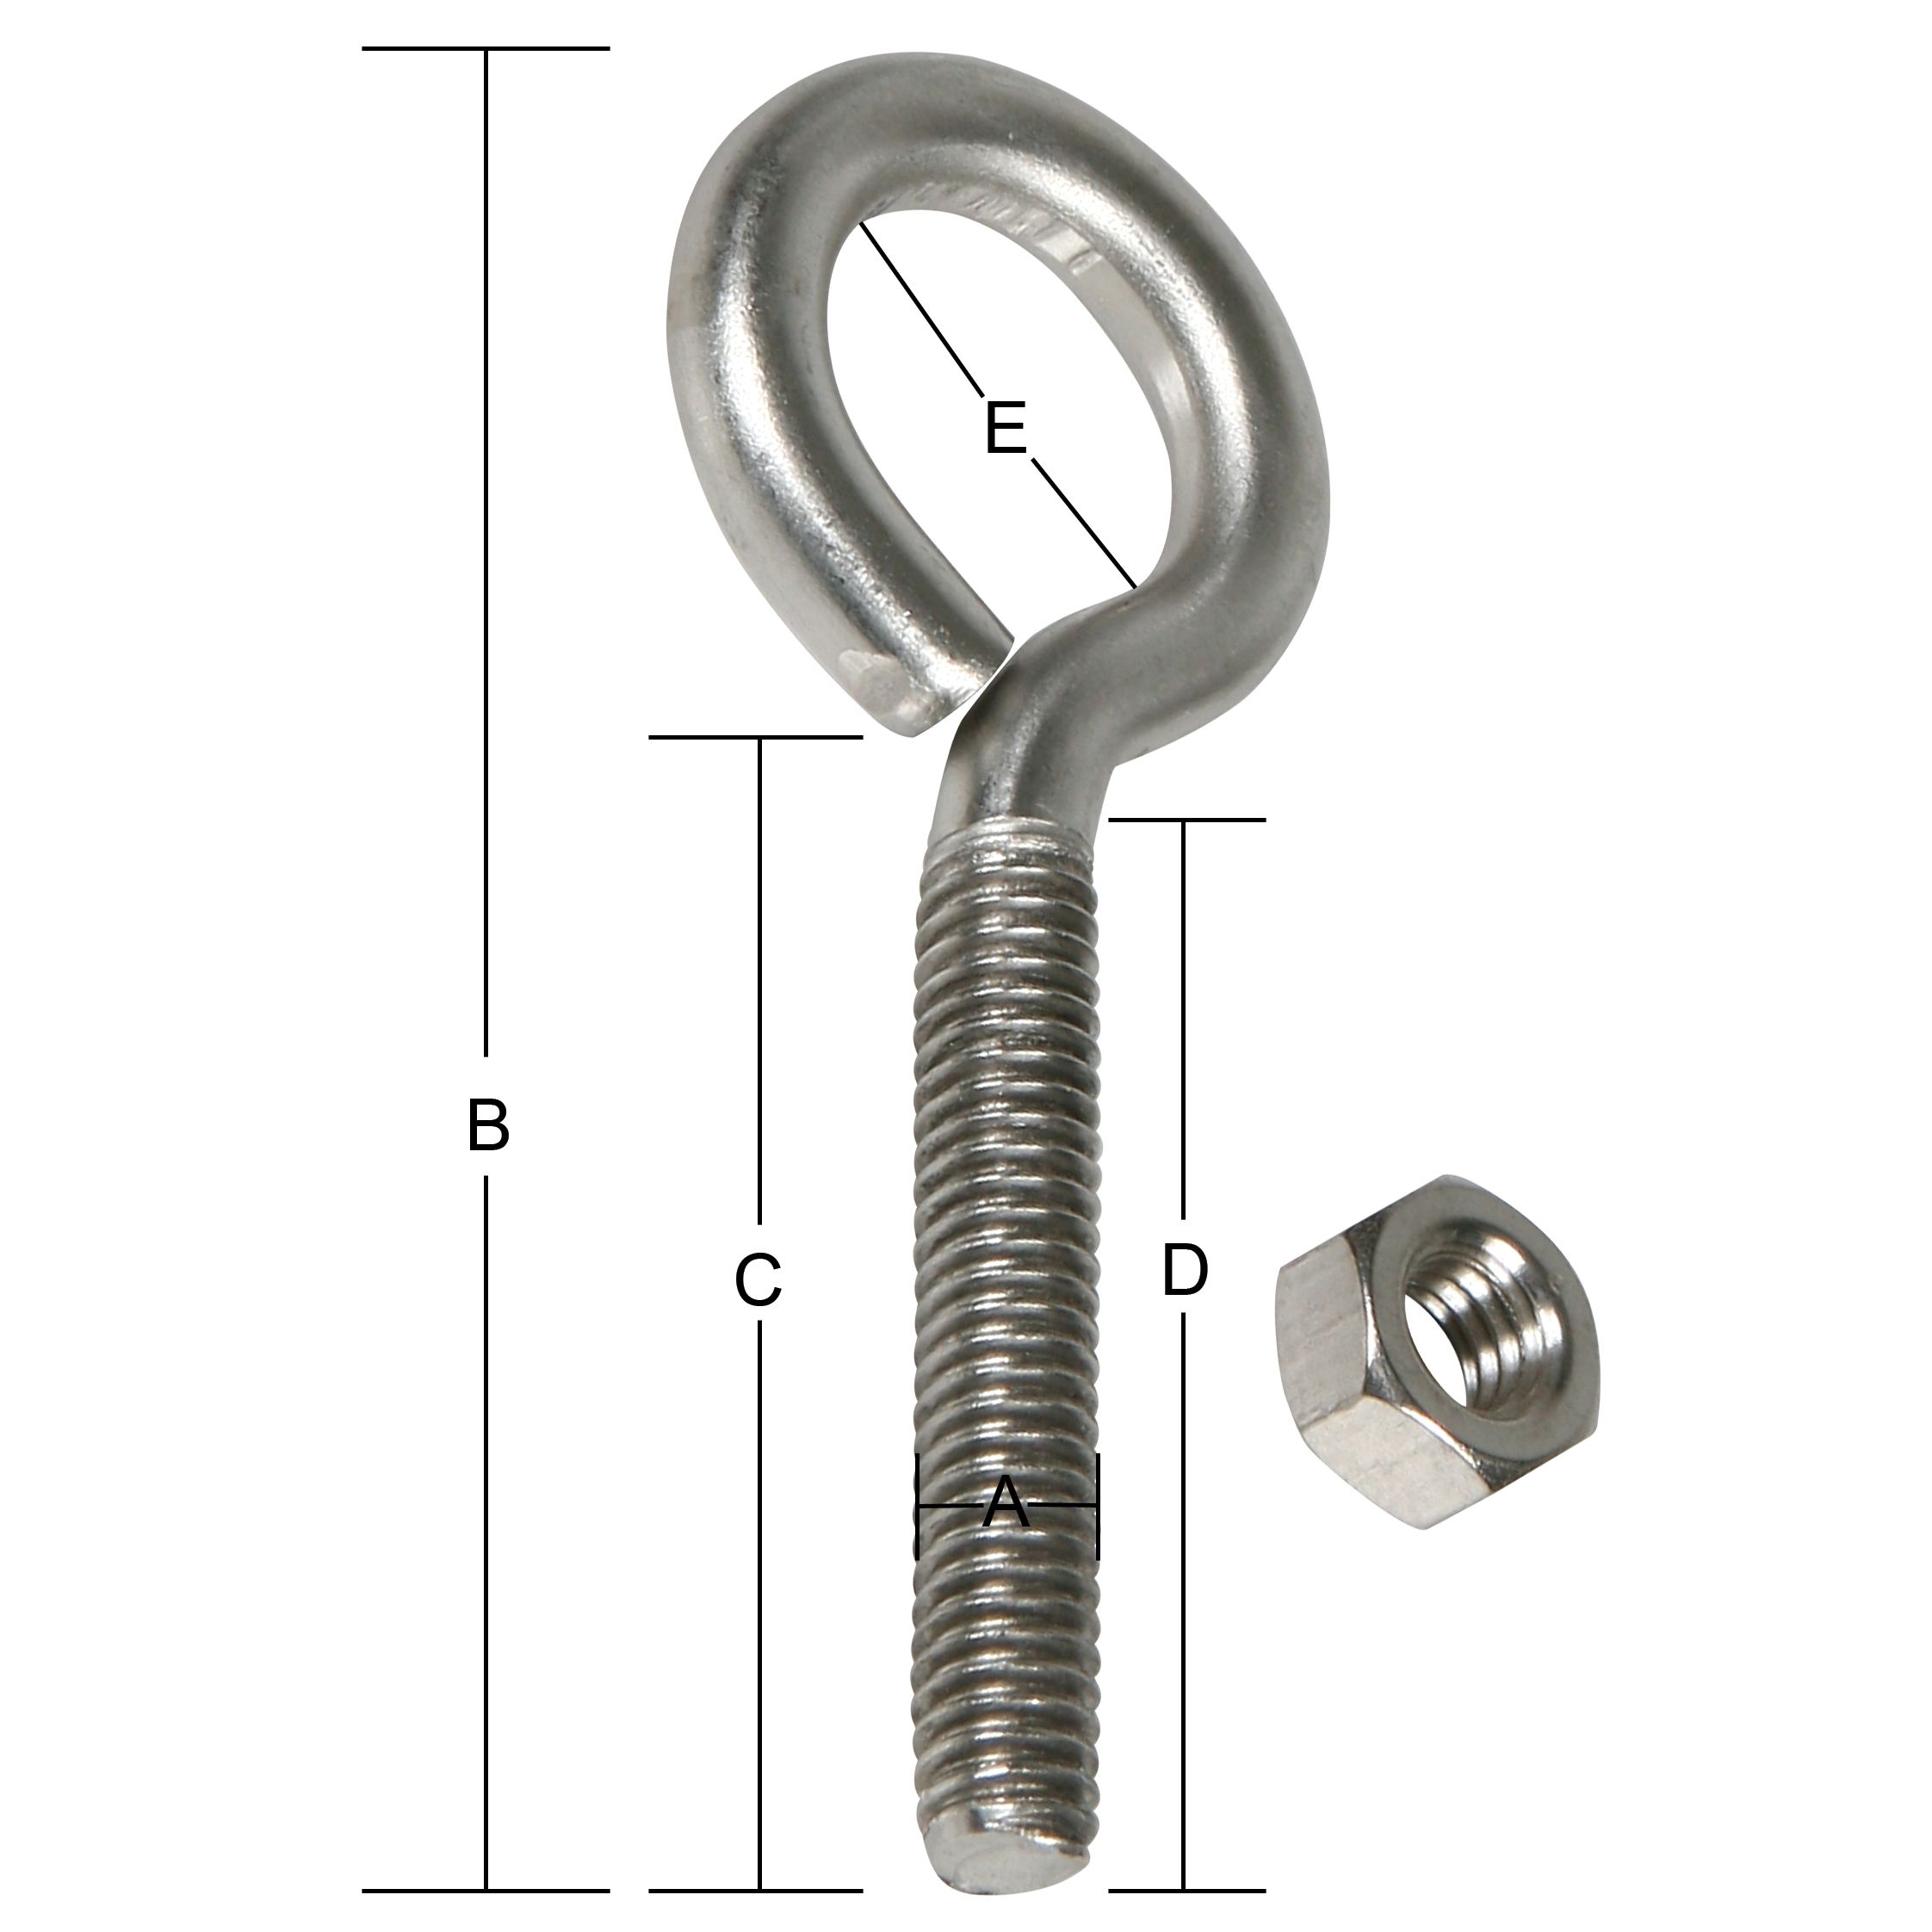 Details about   4 Packs Lehigh Stainless Steel Eye Bolt w Nut 3/16" x 3 7/8,Total 8 Eyebolts 